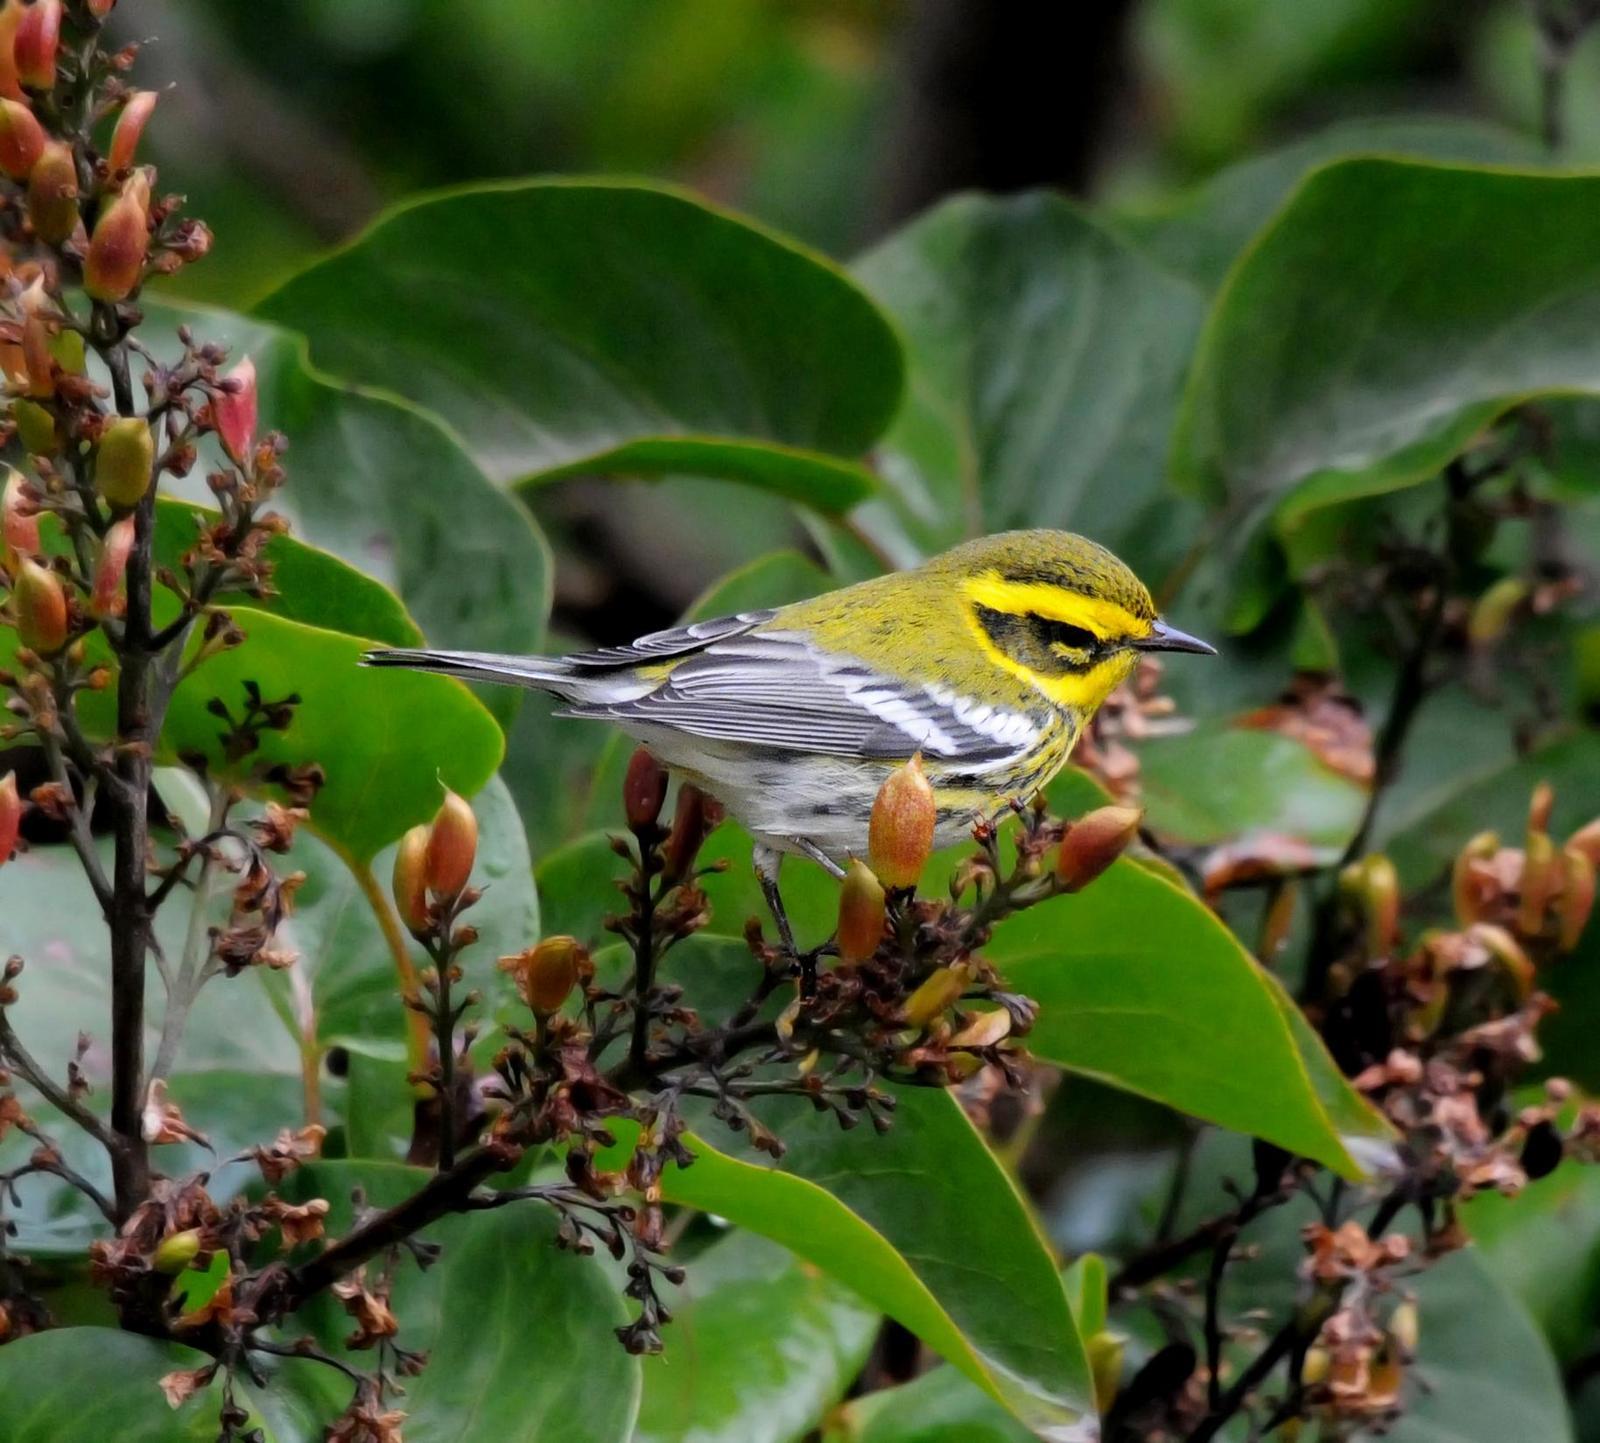 Townsend's Warbler Photo by Steven Mlodinow